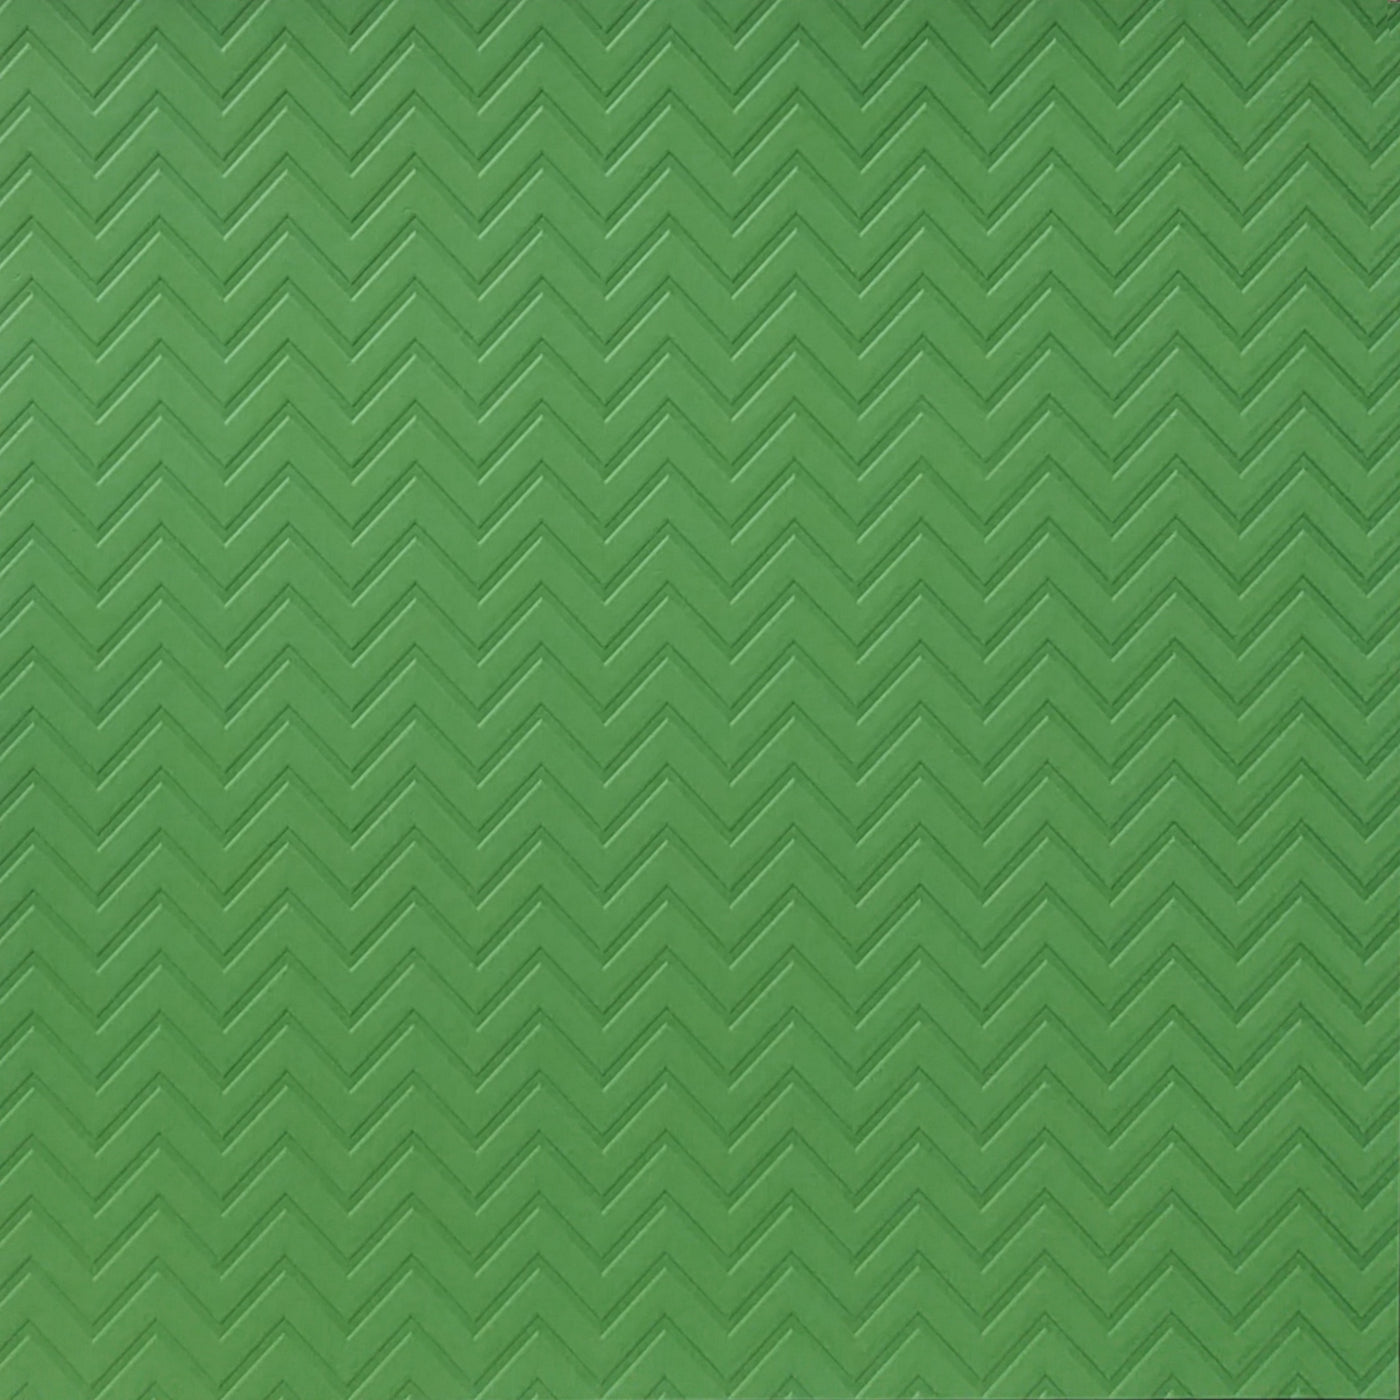 Green 12x12 cardstock with color-on-color zig zag pattern - Recollection Signature paper